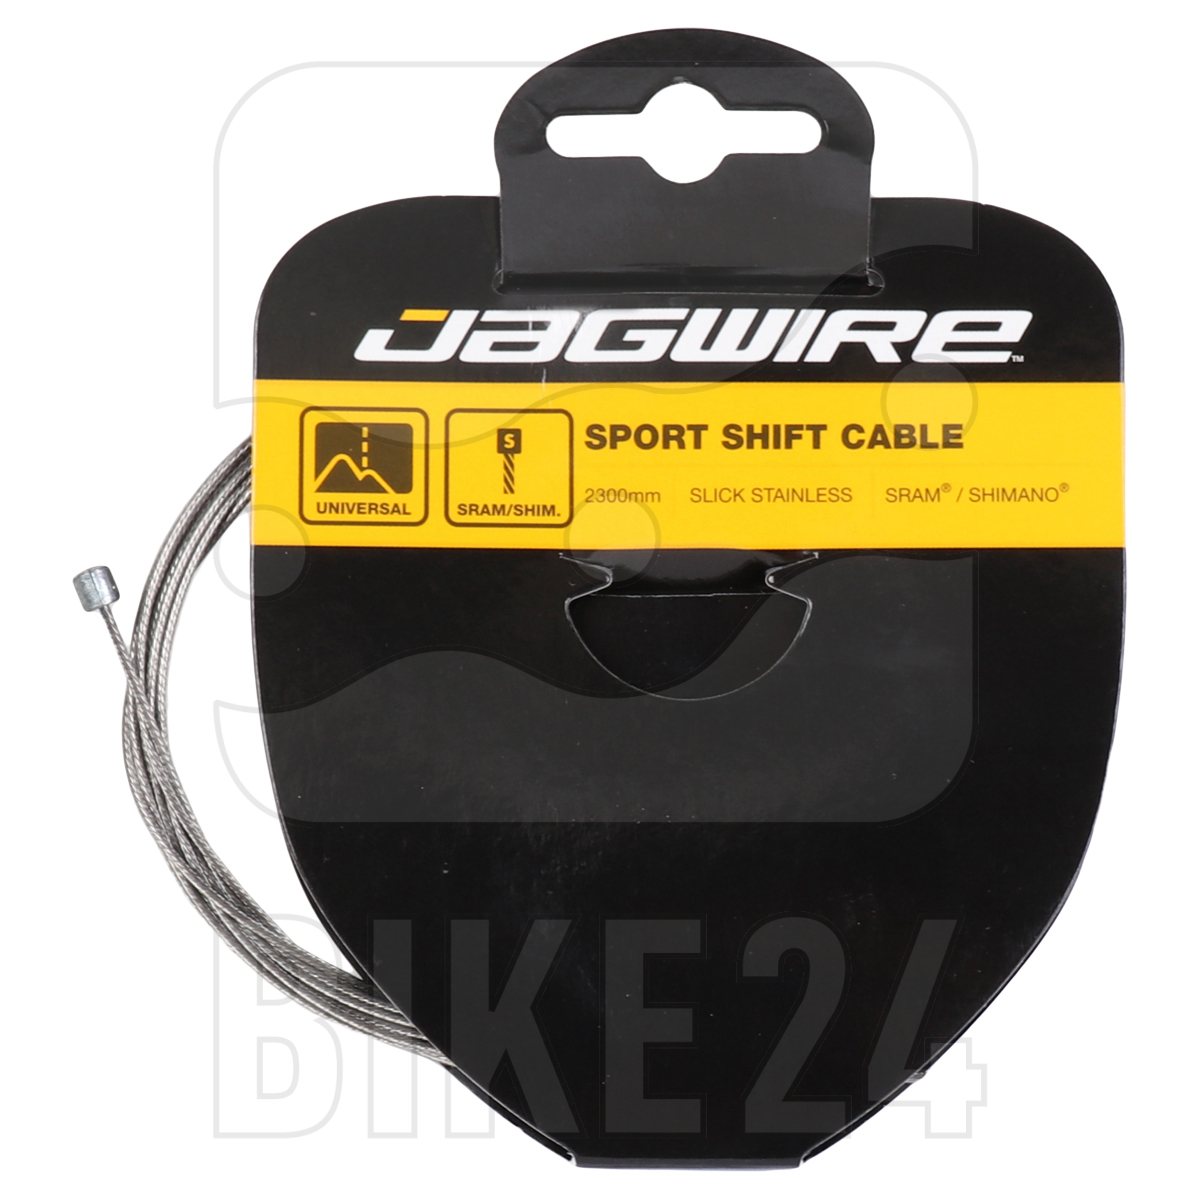 Productfoto van Jagwire Sport Shifting Cable - Stainless Steel, Slick